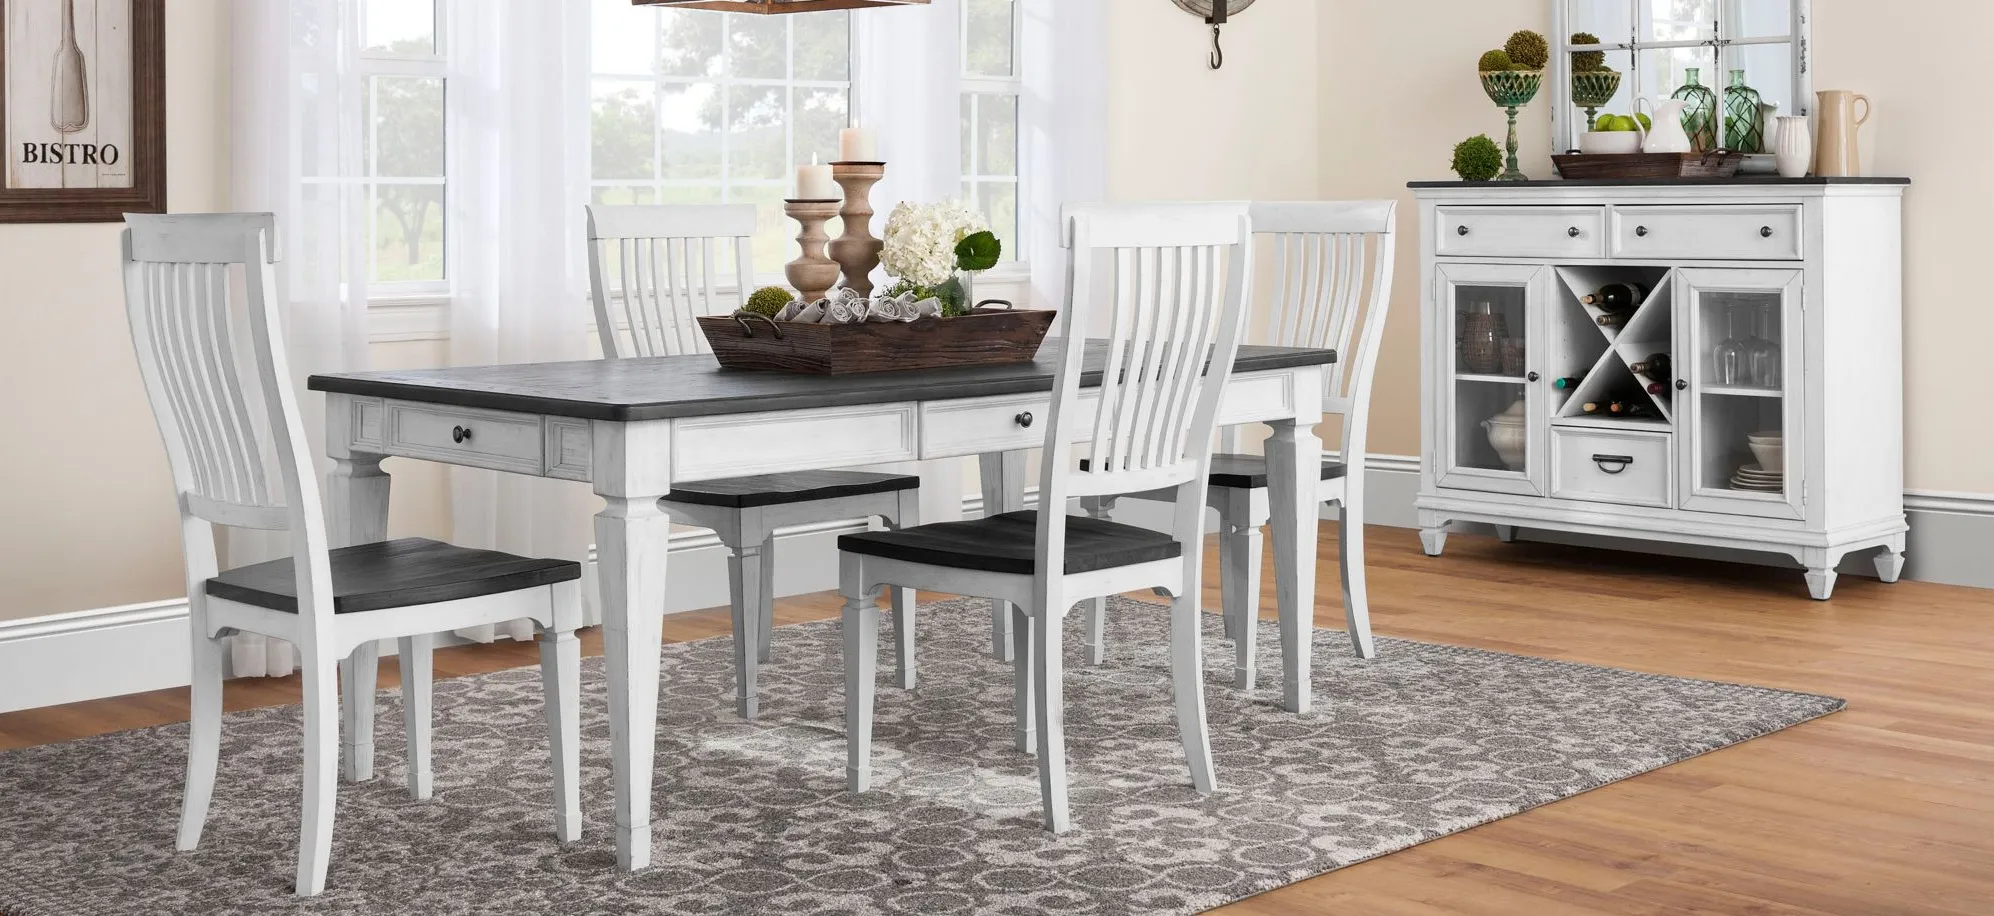 Shelby 5-pc. Dining Set in White / Gray by Liberty Furniture